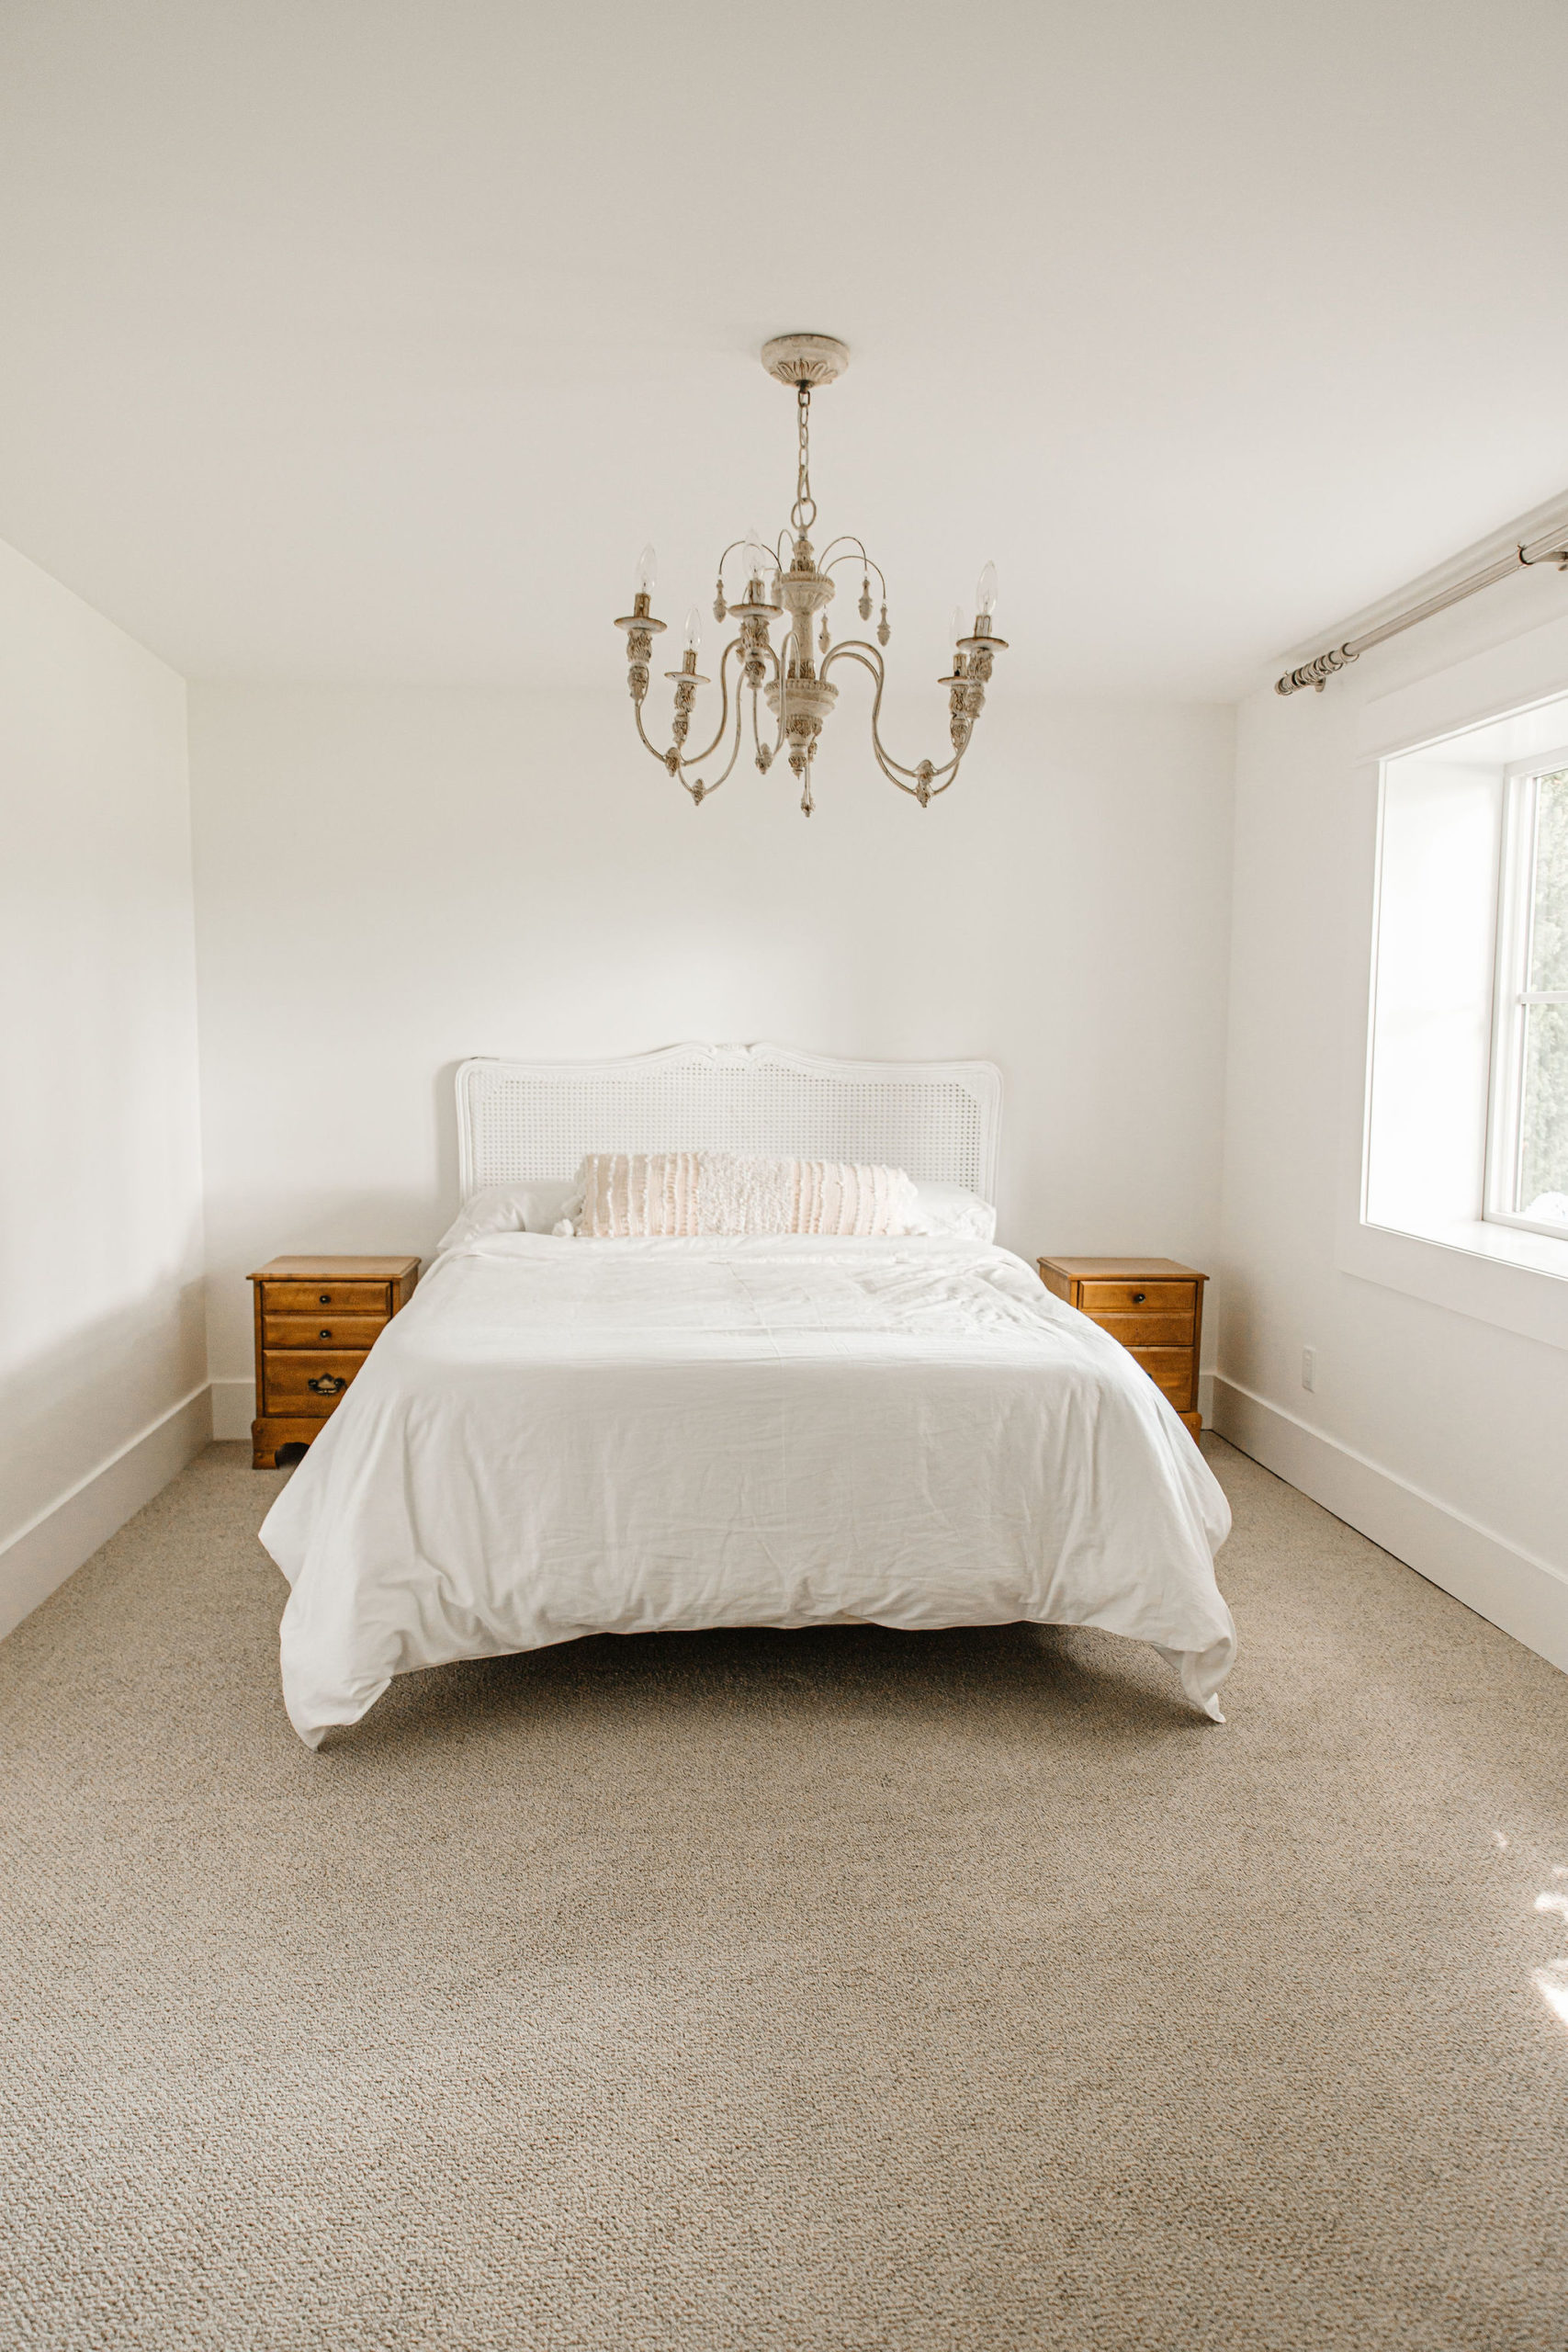 Our Spare Bedroom Reveal - the full renovation transformation